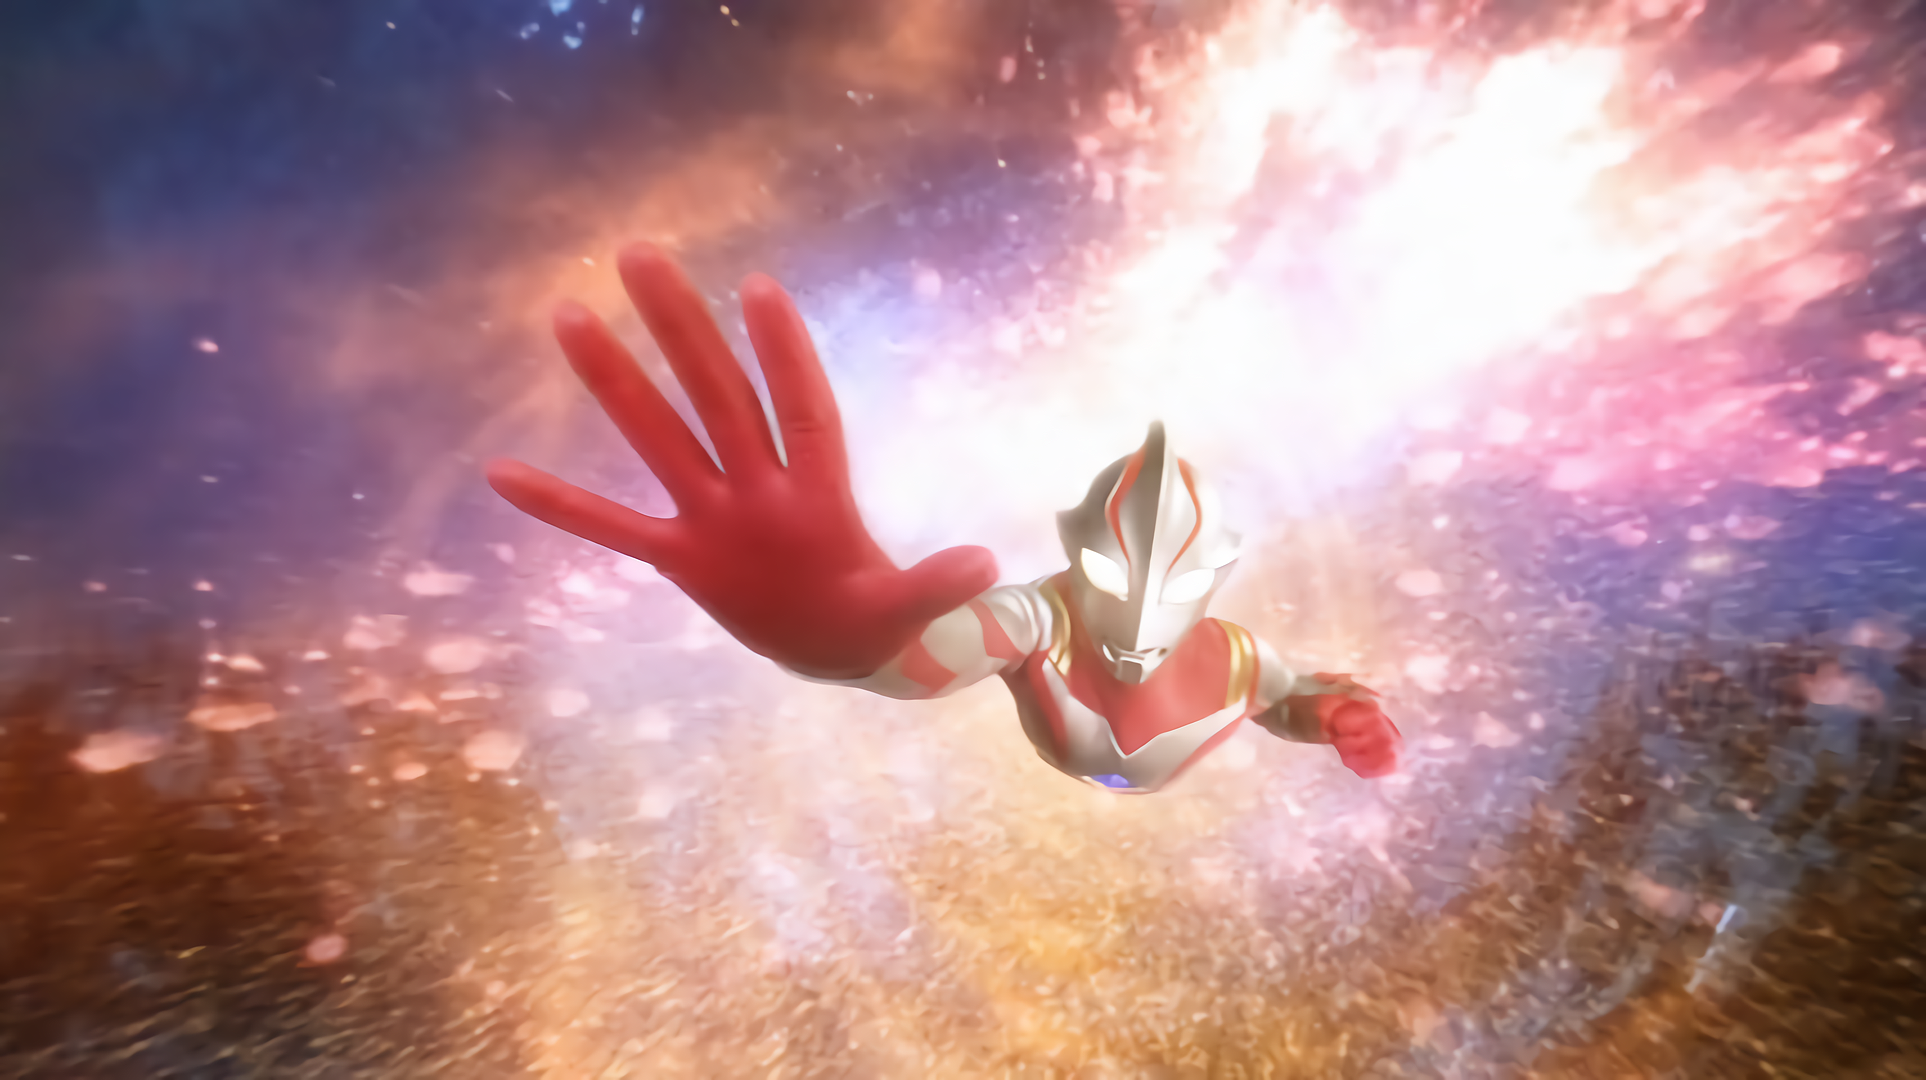 How popular is “ULTRAMAN” in the world!